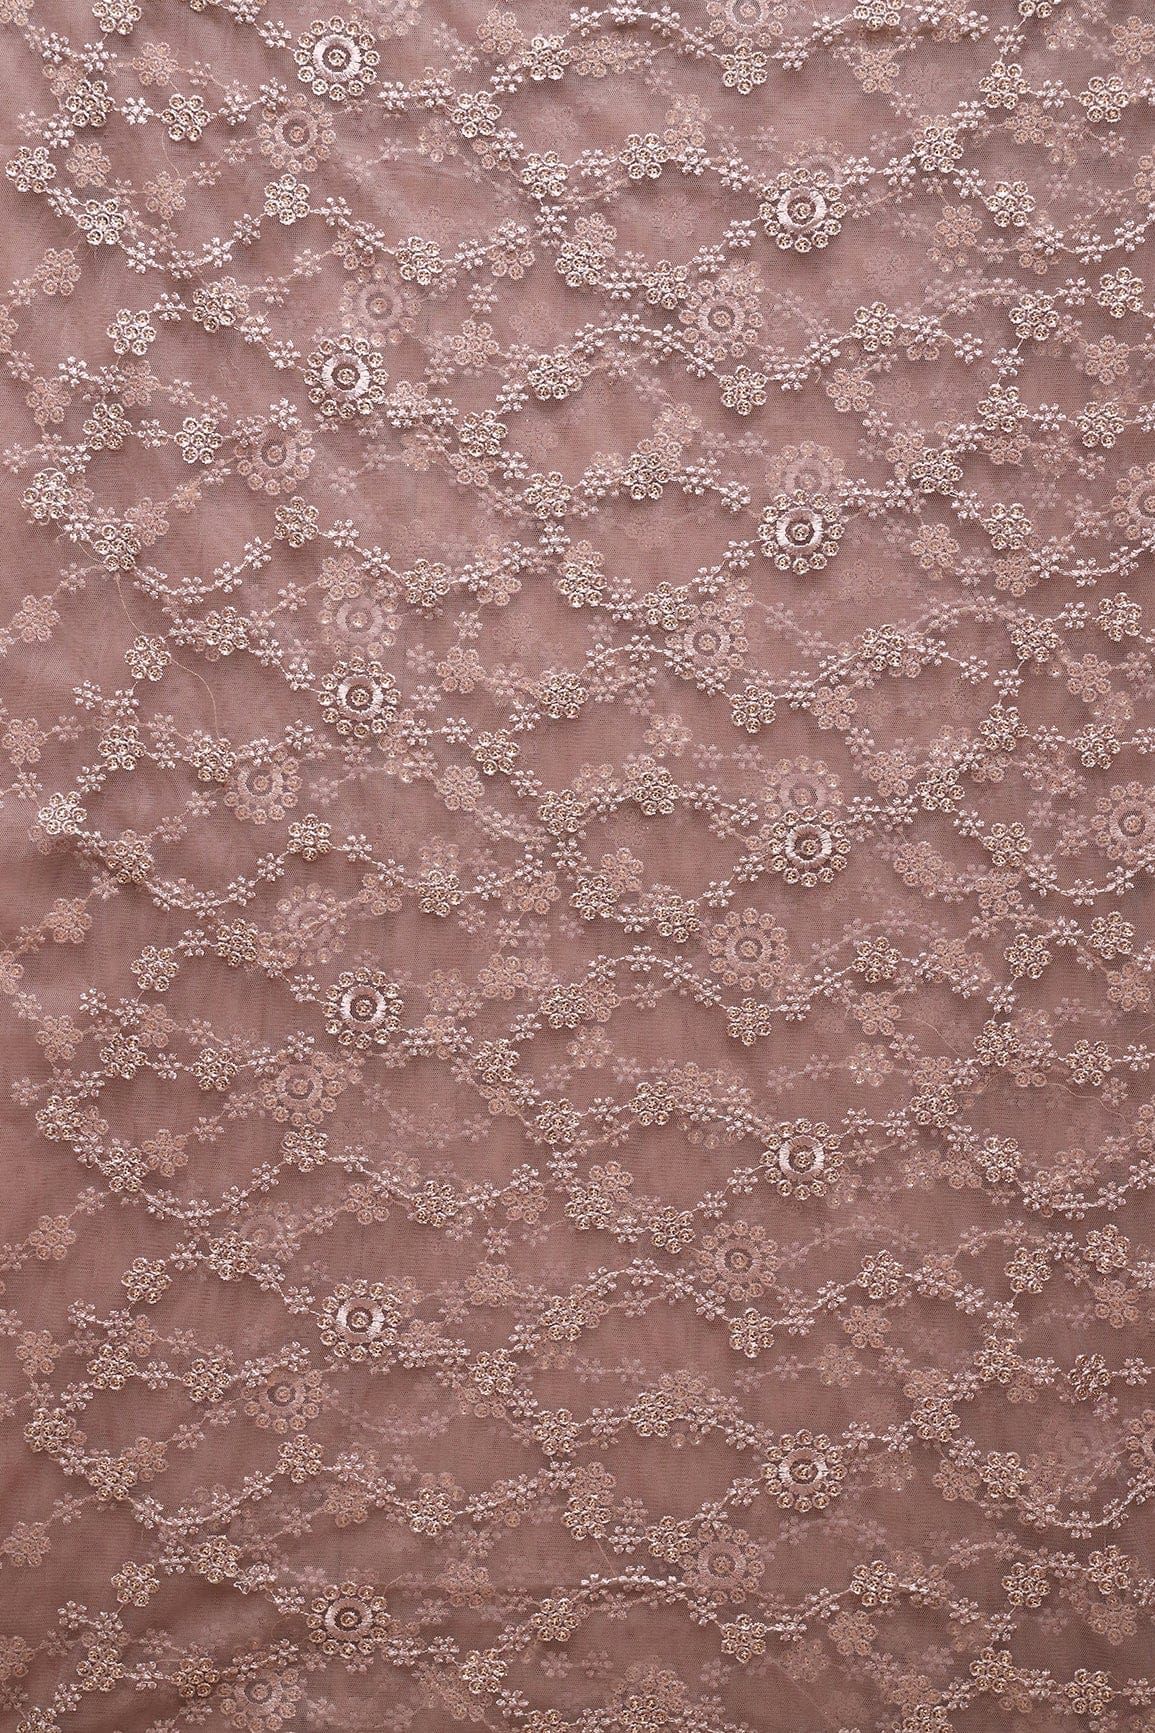 doeraa Embroidery Fabrics 2.50 Meter Cut Piece Of Gold Sequins With Mauve Thread Embroidery Work On Mauve Soft Net Fabric